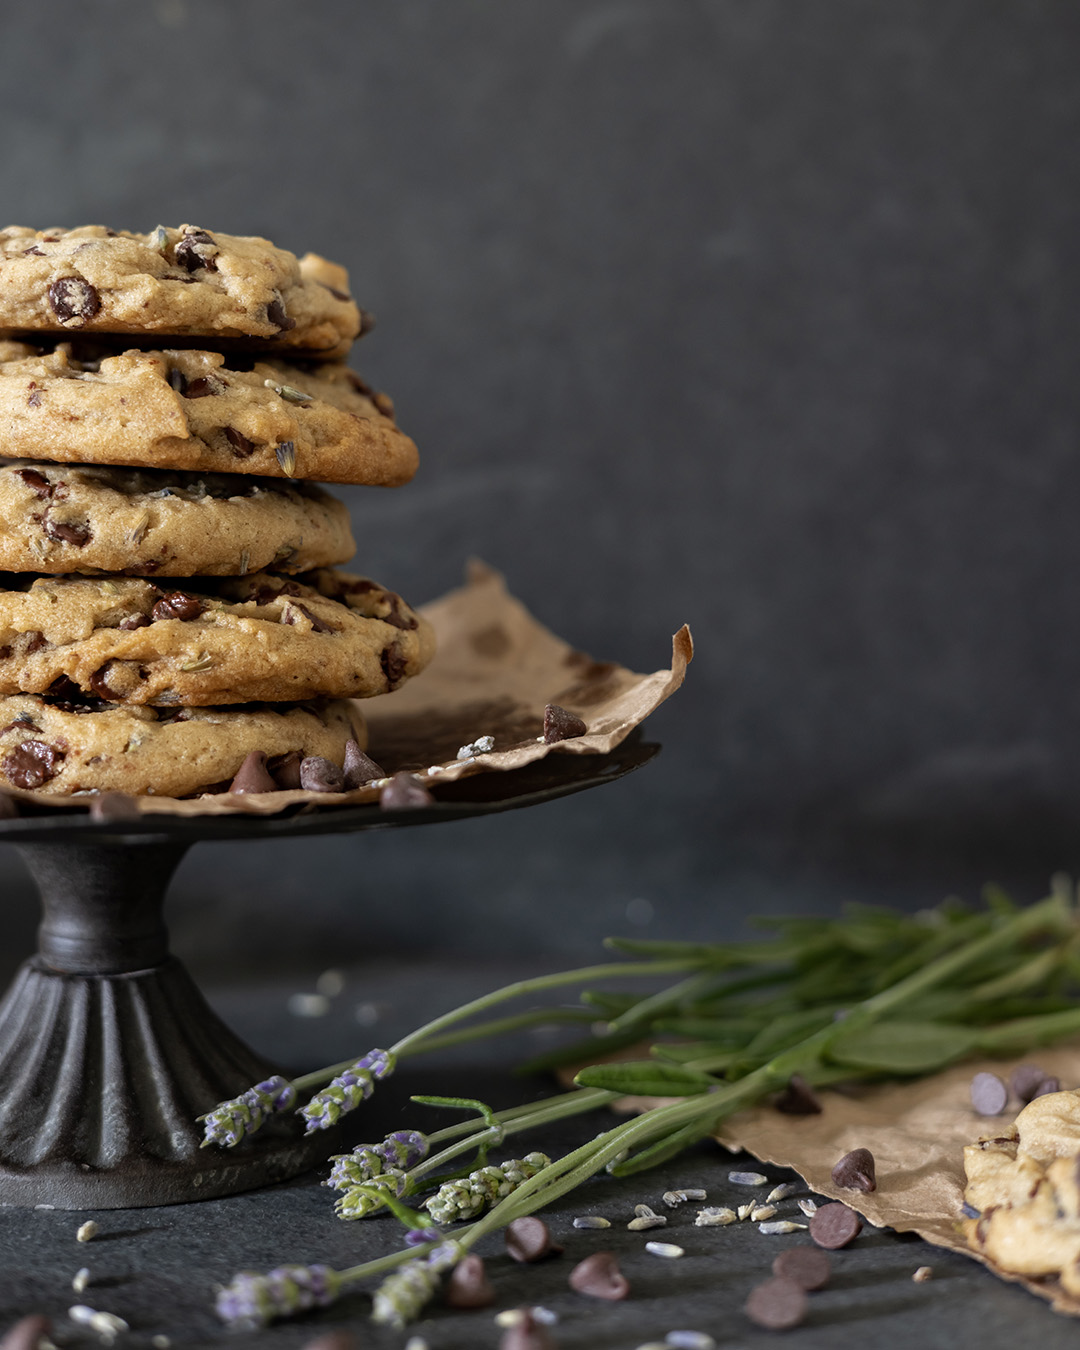 These lavender chocolate chip cookies are a bit of a fancy, unexpected variation on the classic chocolate chip cookie. Perfect for special summer get-togethers or to elevate your afternoon iced coffee break.